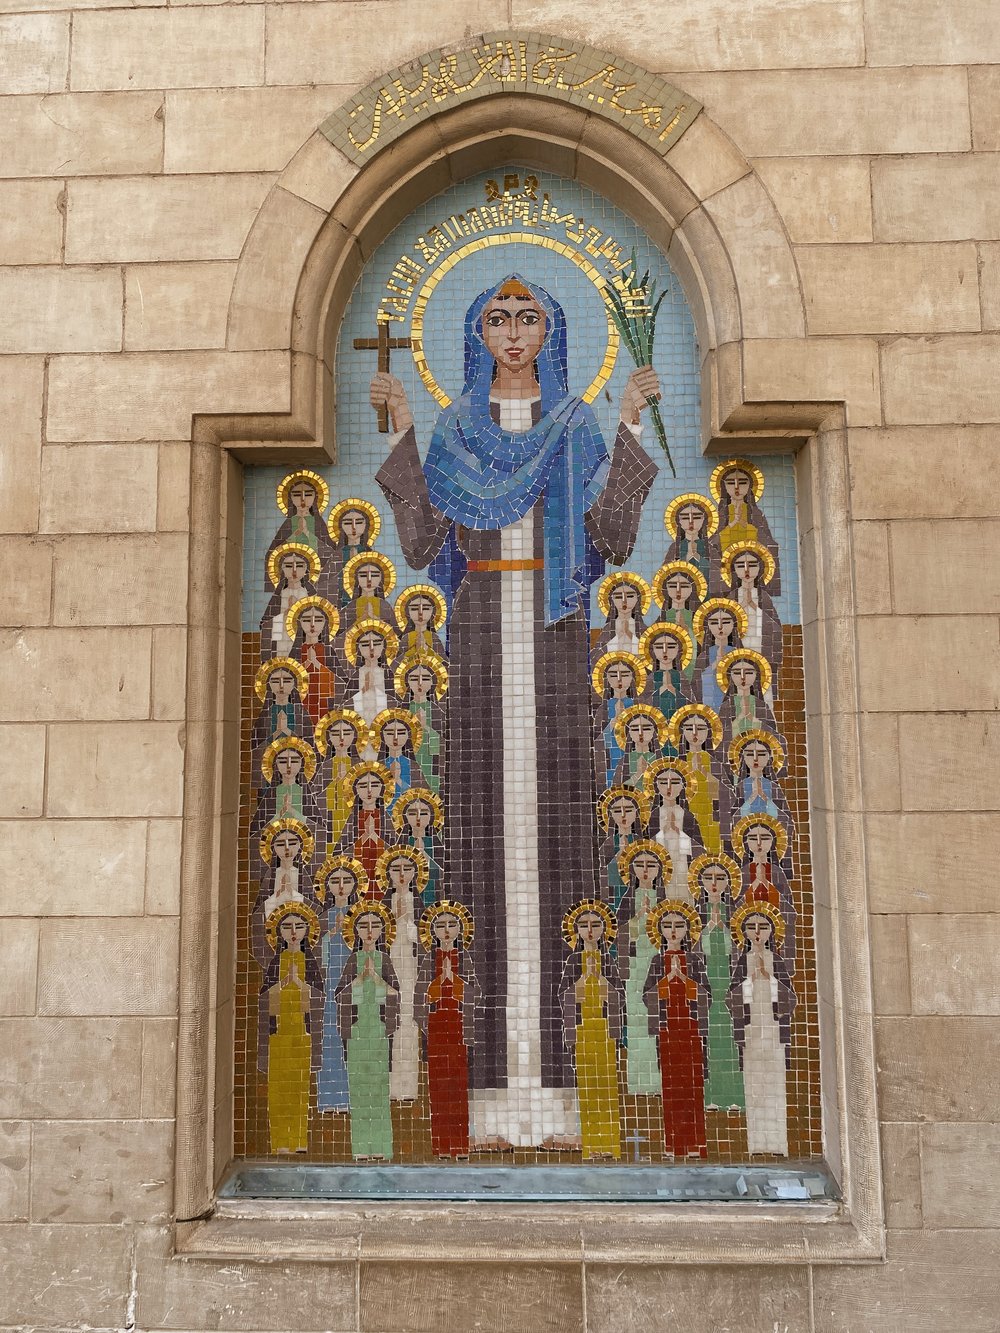 One of the Exterior's Mosaics.